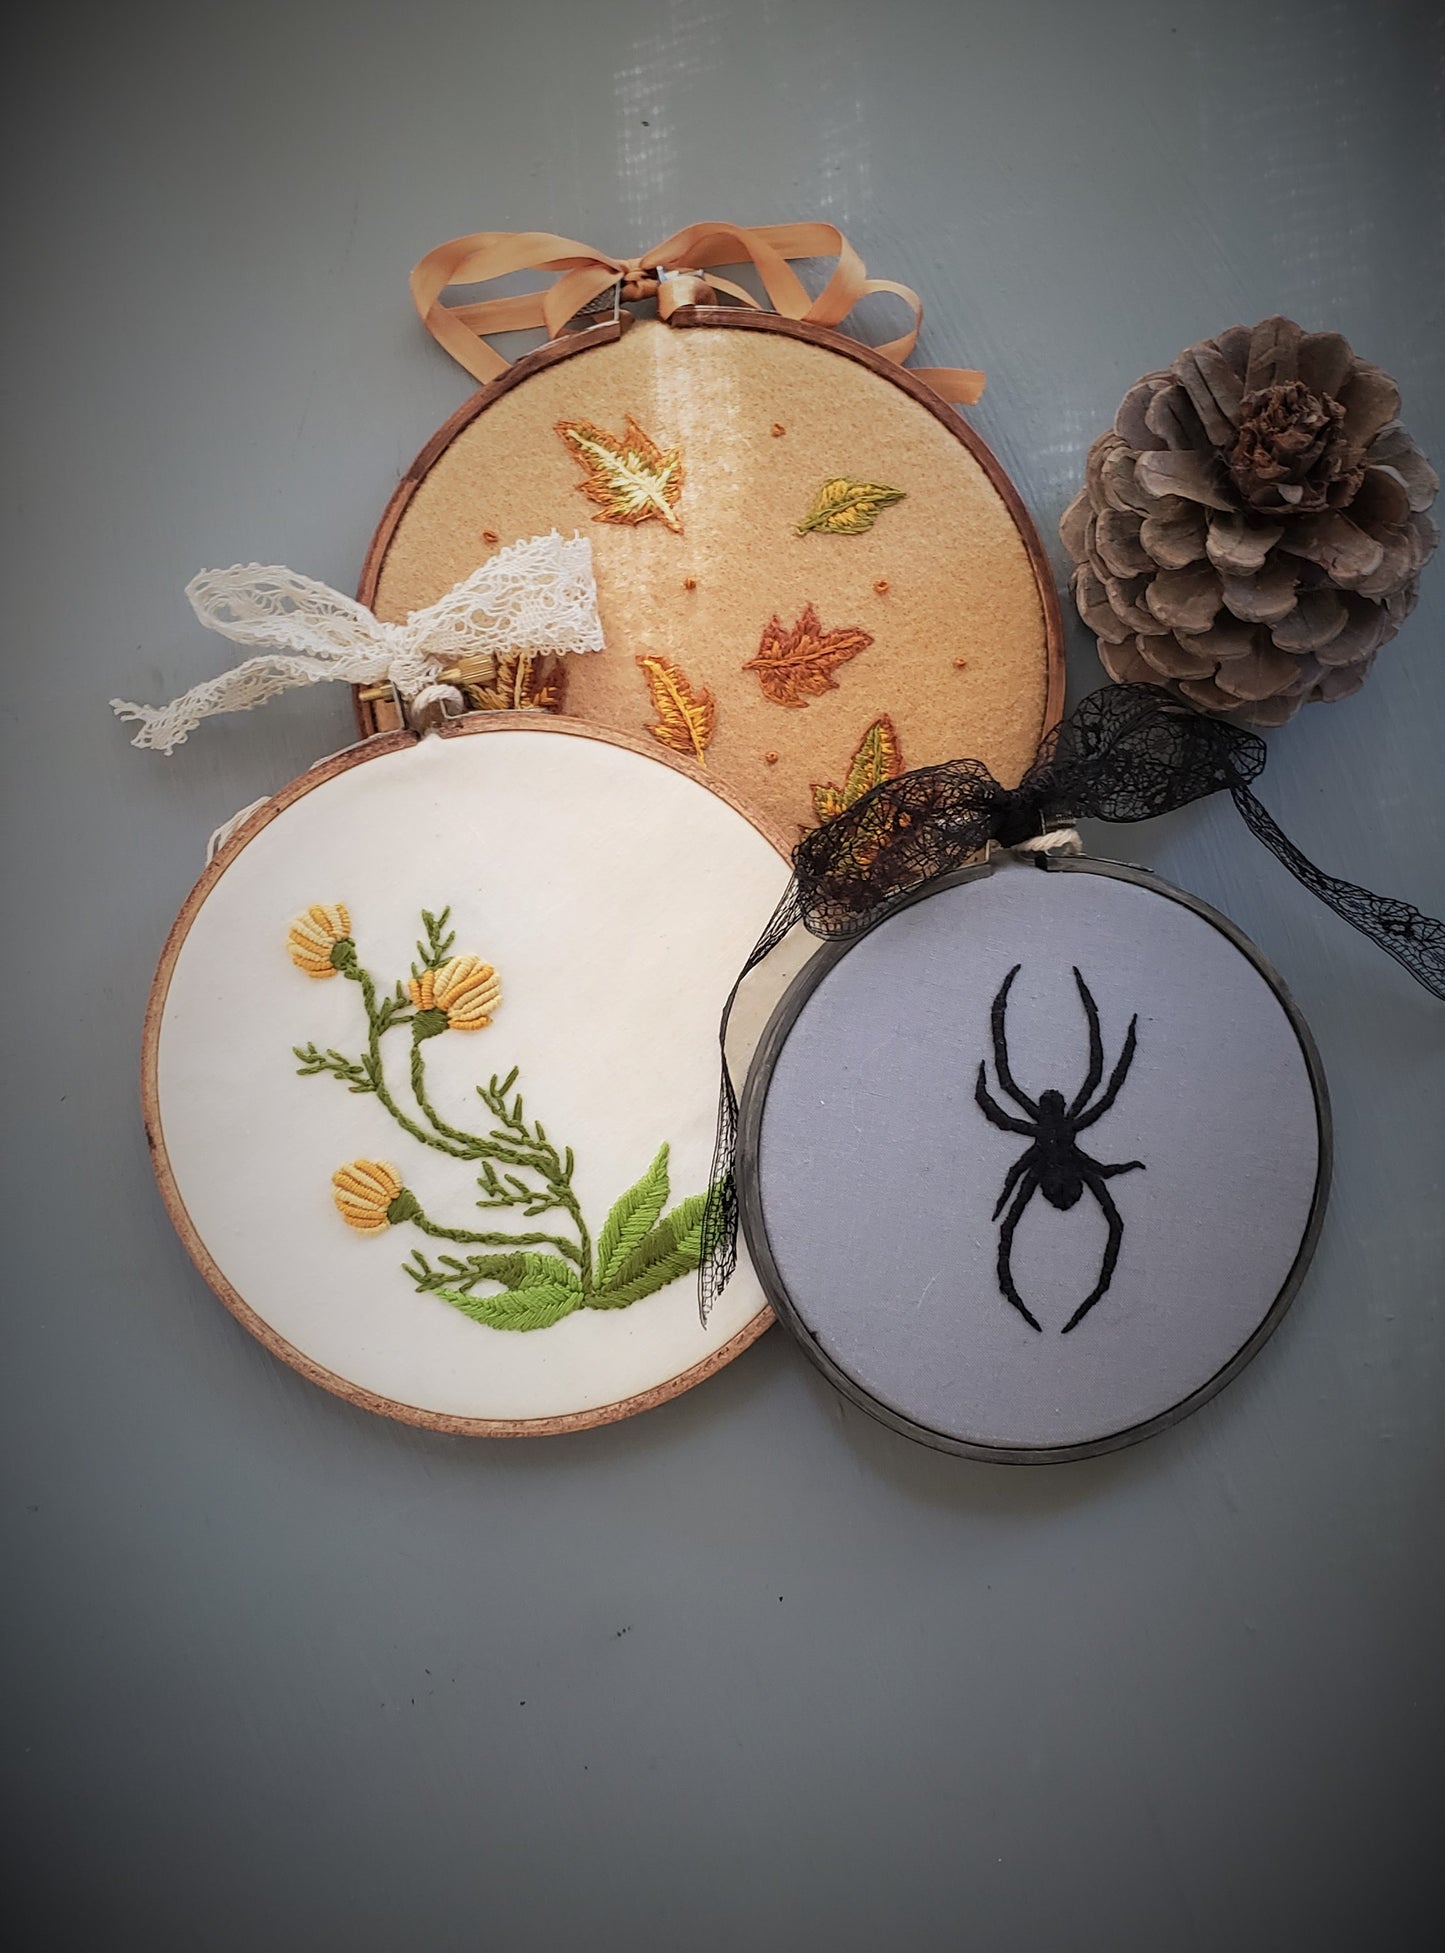 Falling Hand Embroidered Hoop Art